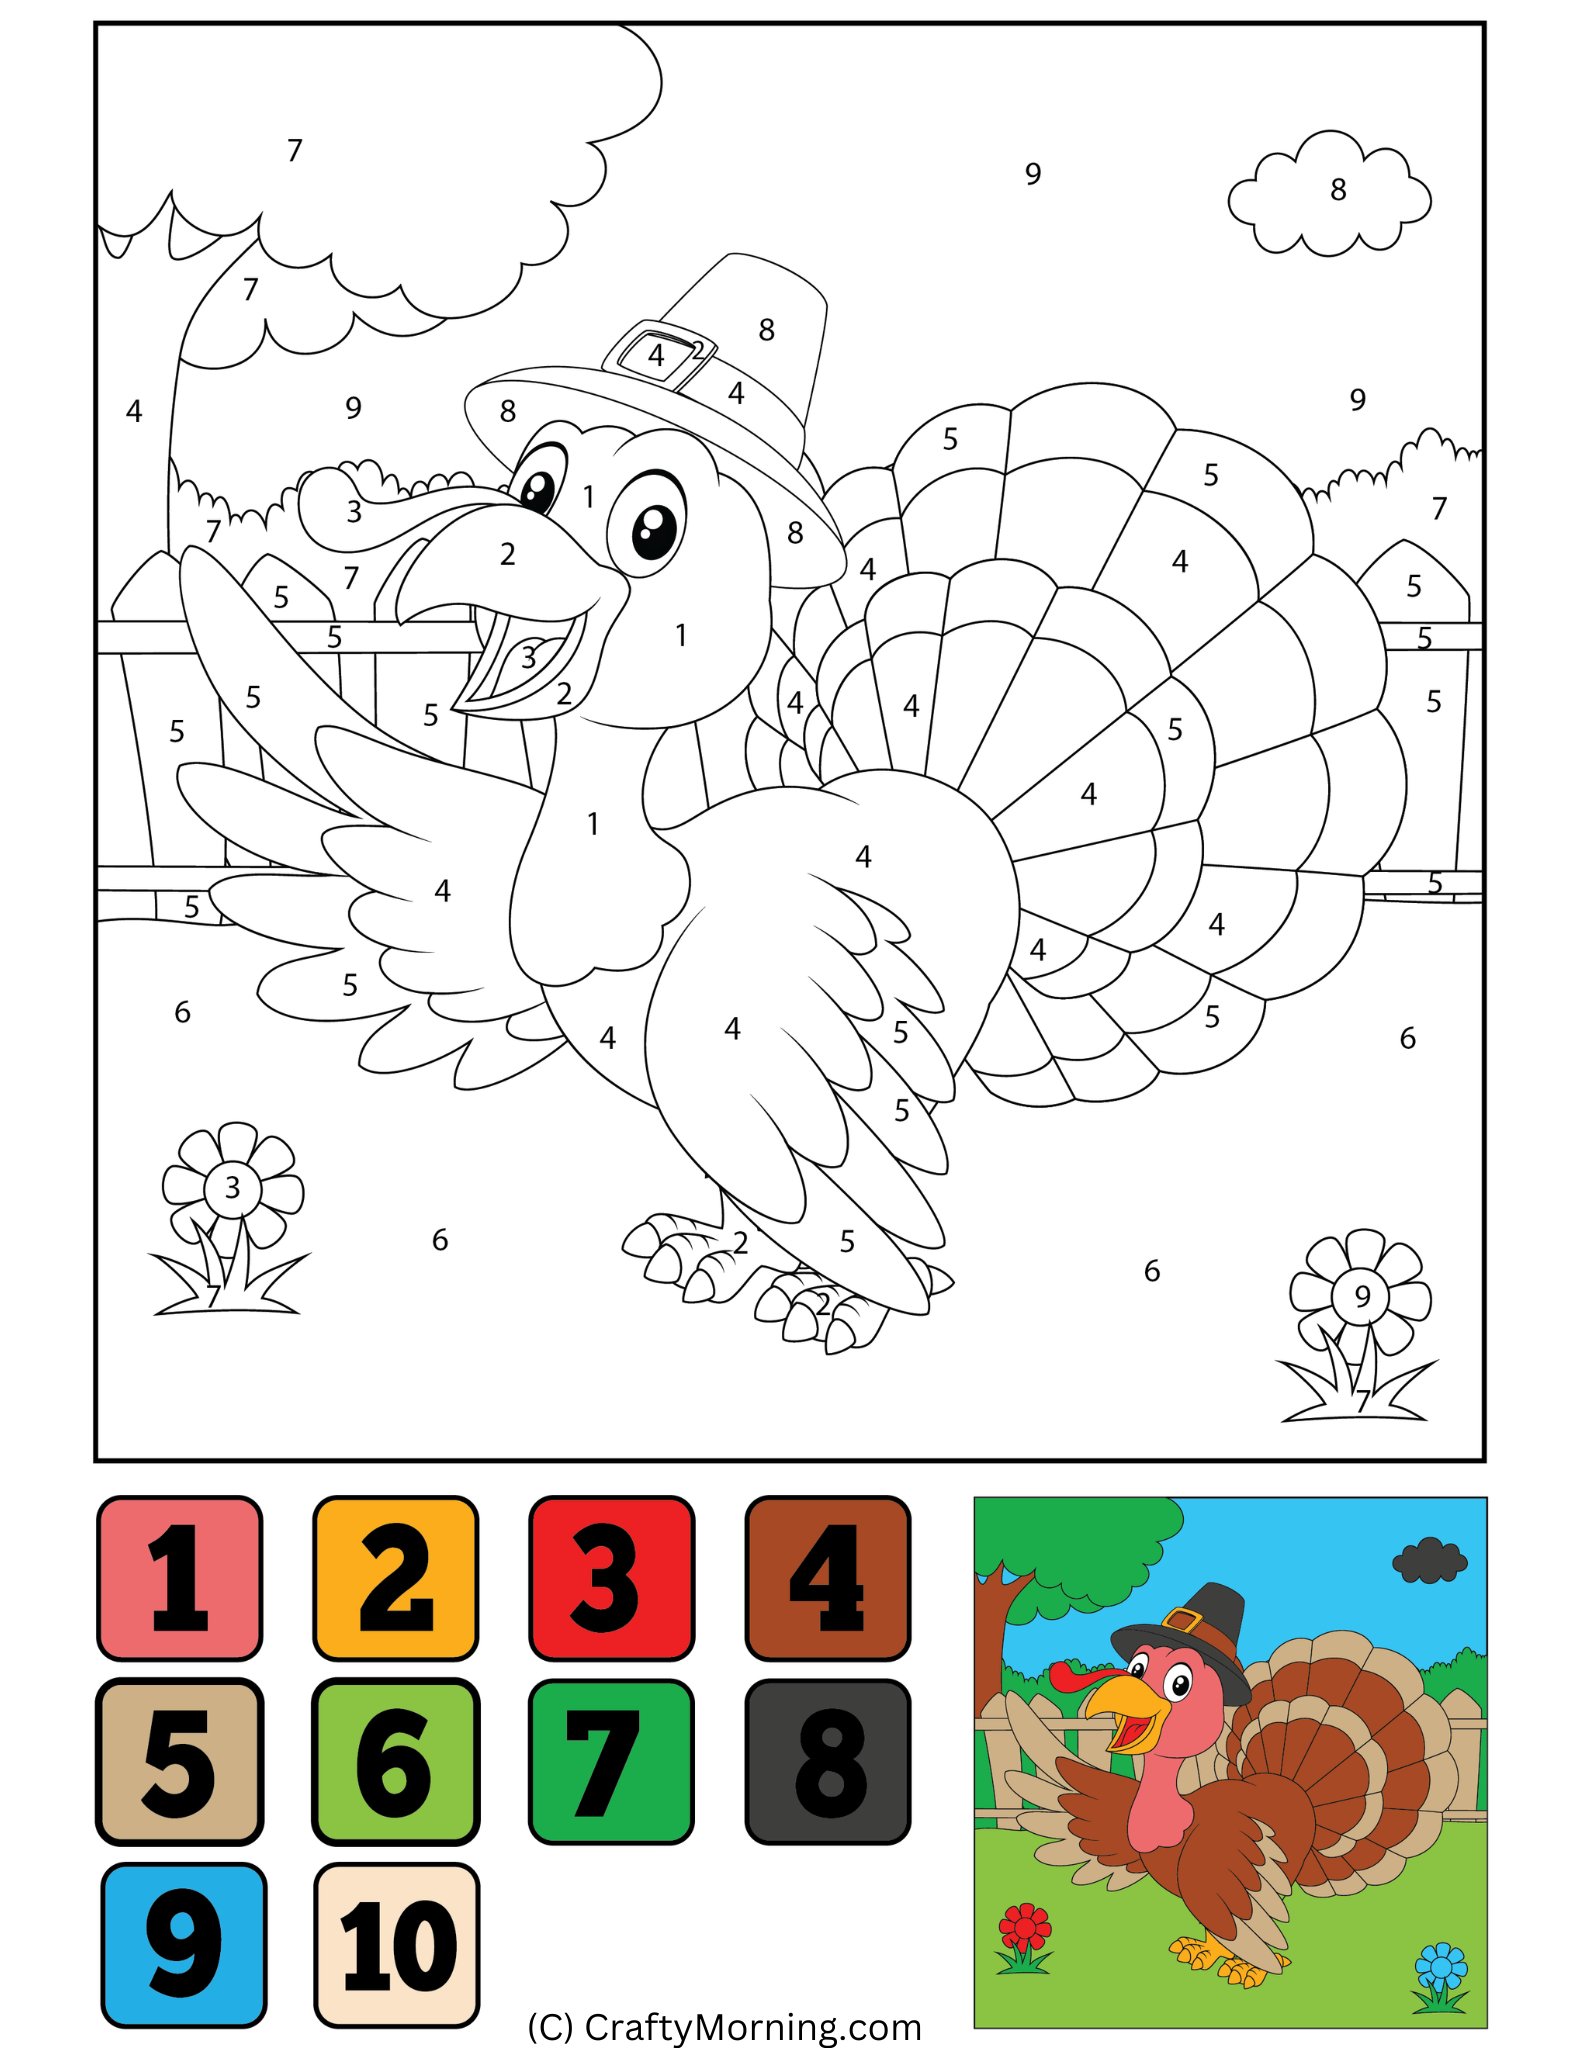 https://cdn.craftymorning.com/wp-content/uploads/2022/10/thanksgiving-color-by-number-printable-2.png